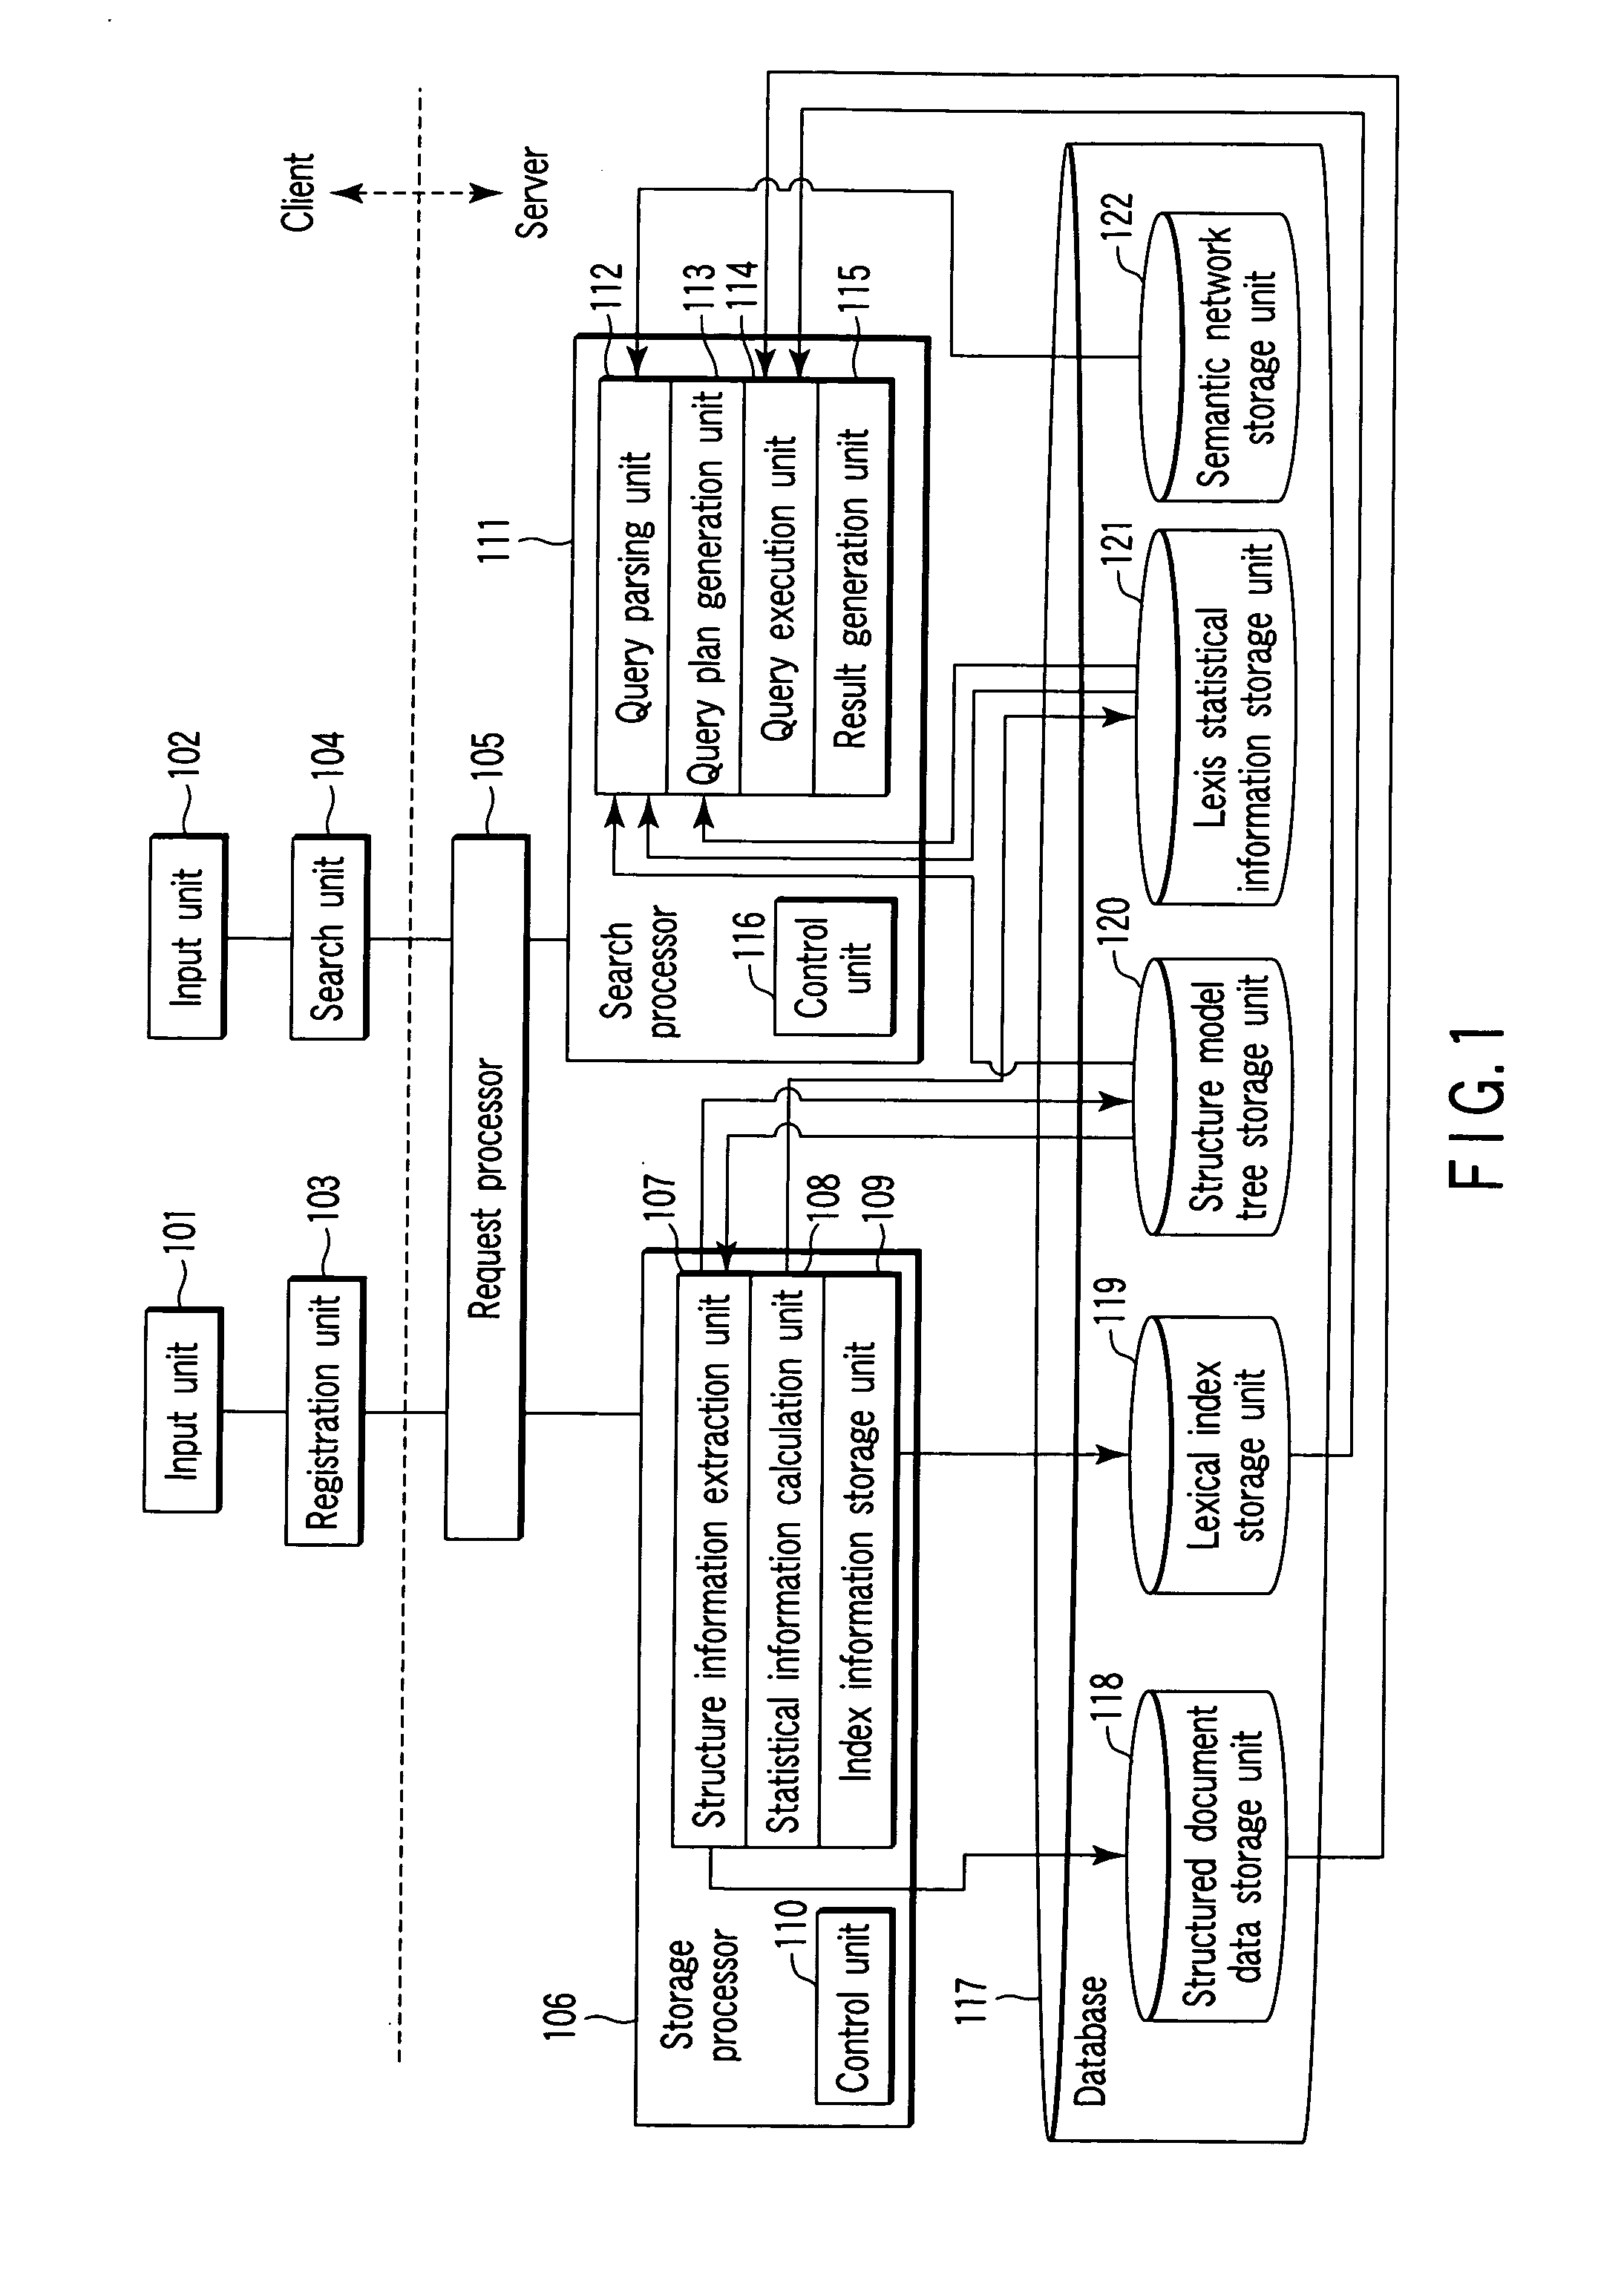 Structured document processing apparatus, structured document search apparatus, structured document system, method, and program